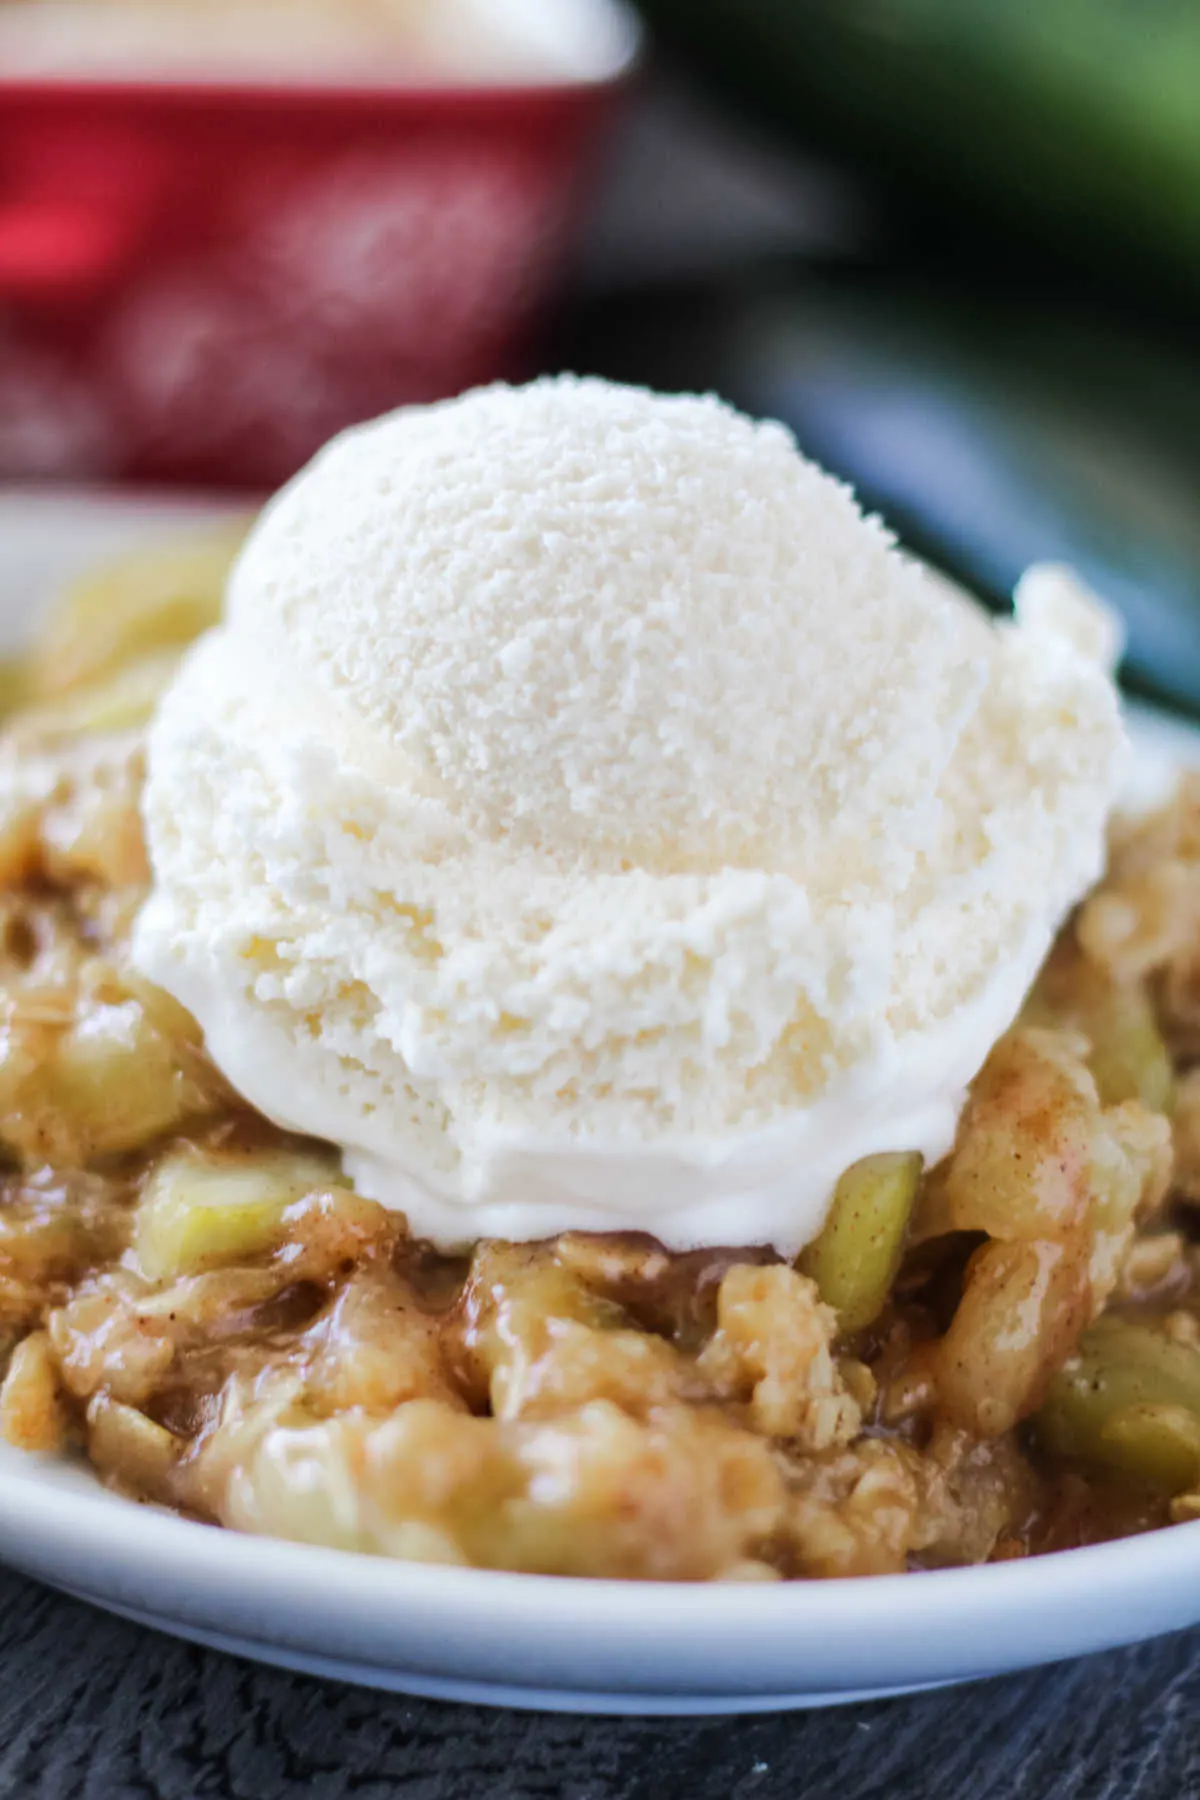 Serving of mock apple crisp made from zucchini topped with scoop of vanilla ice cream.